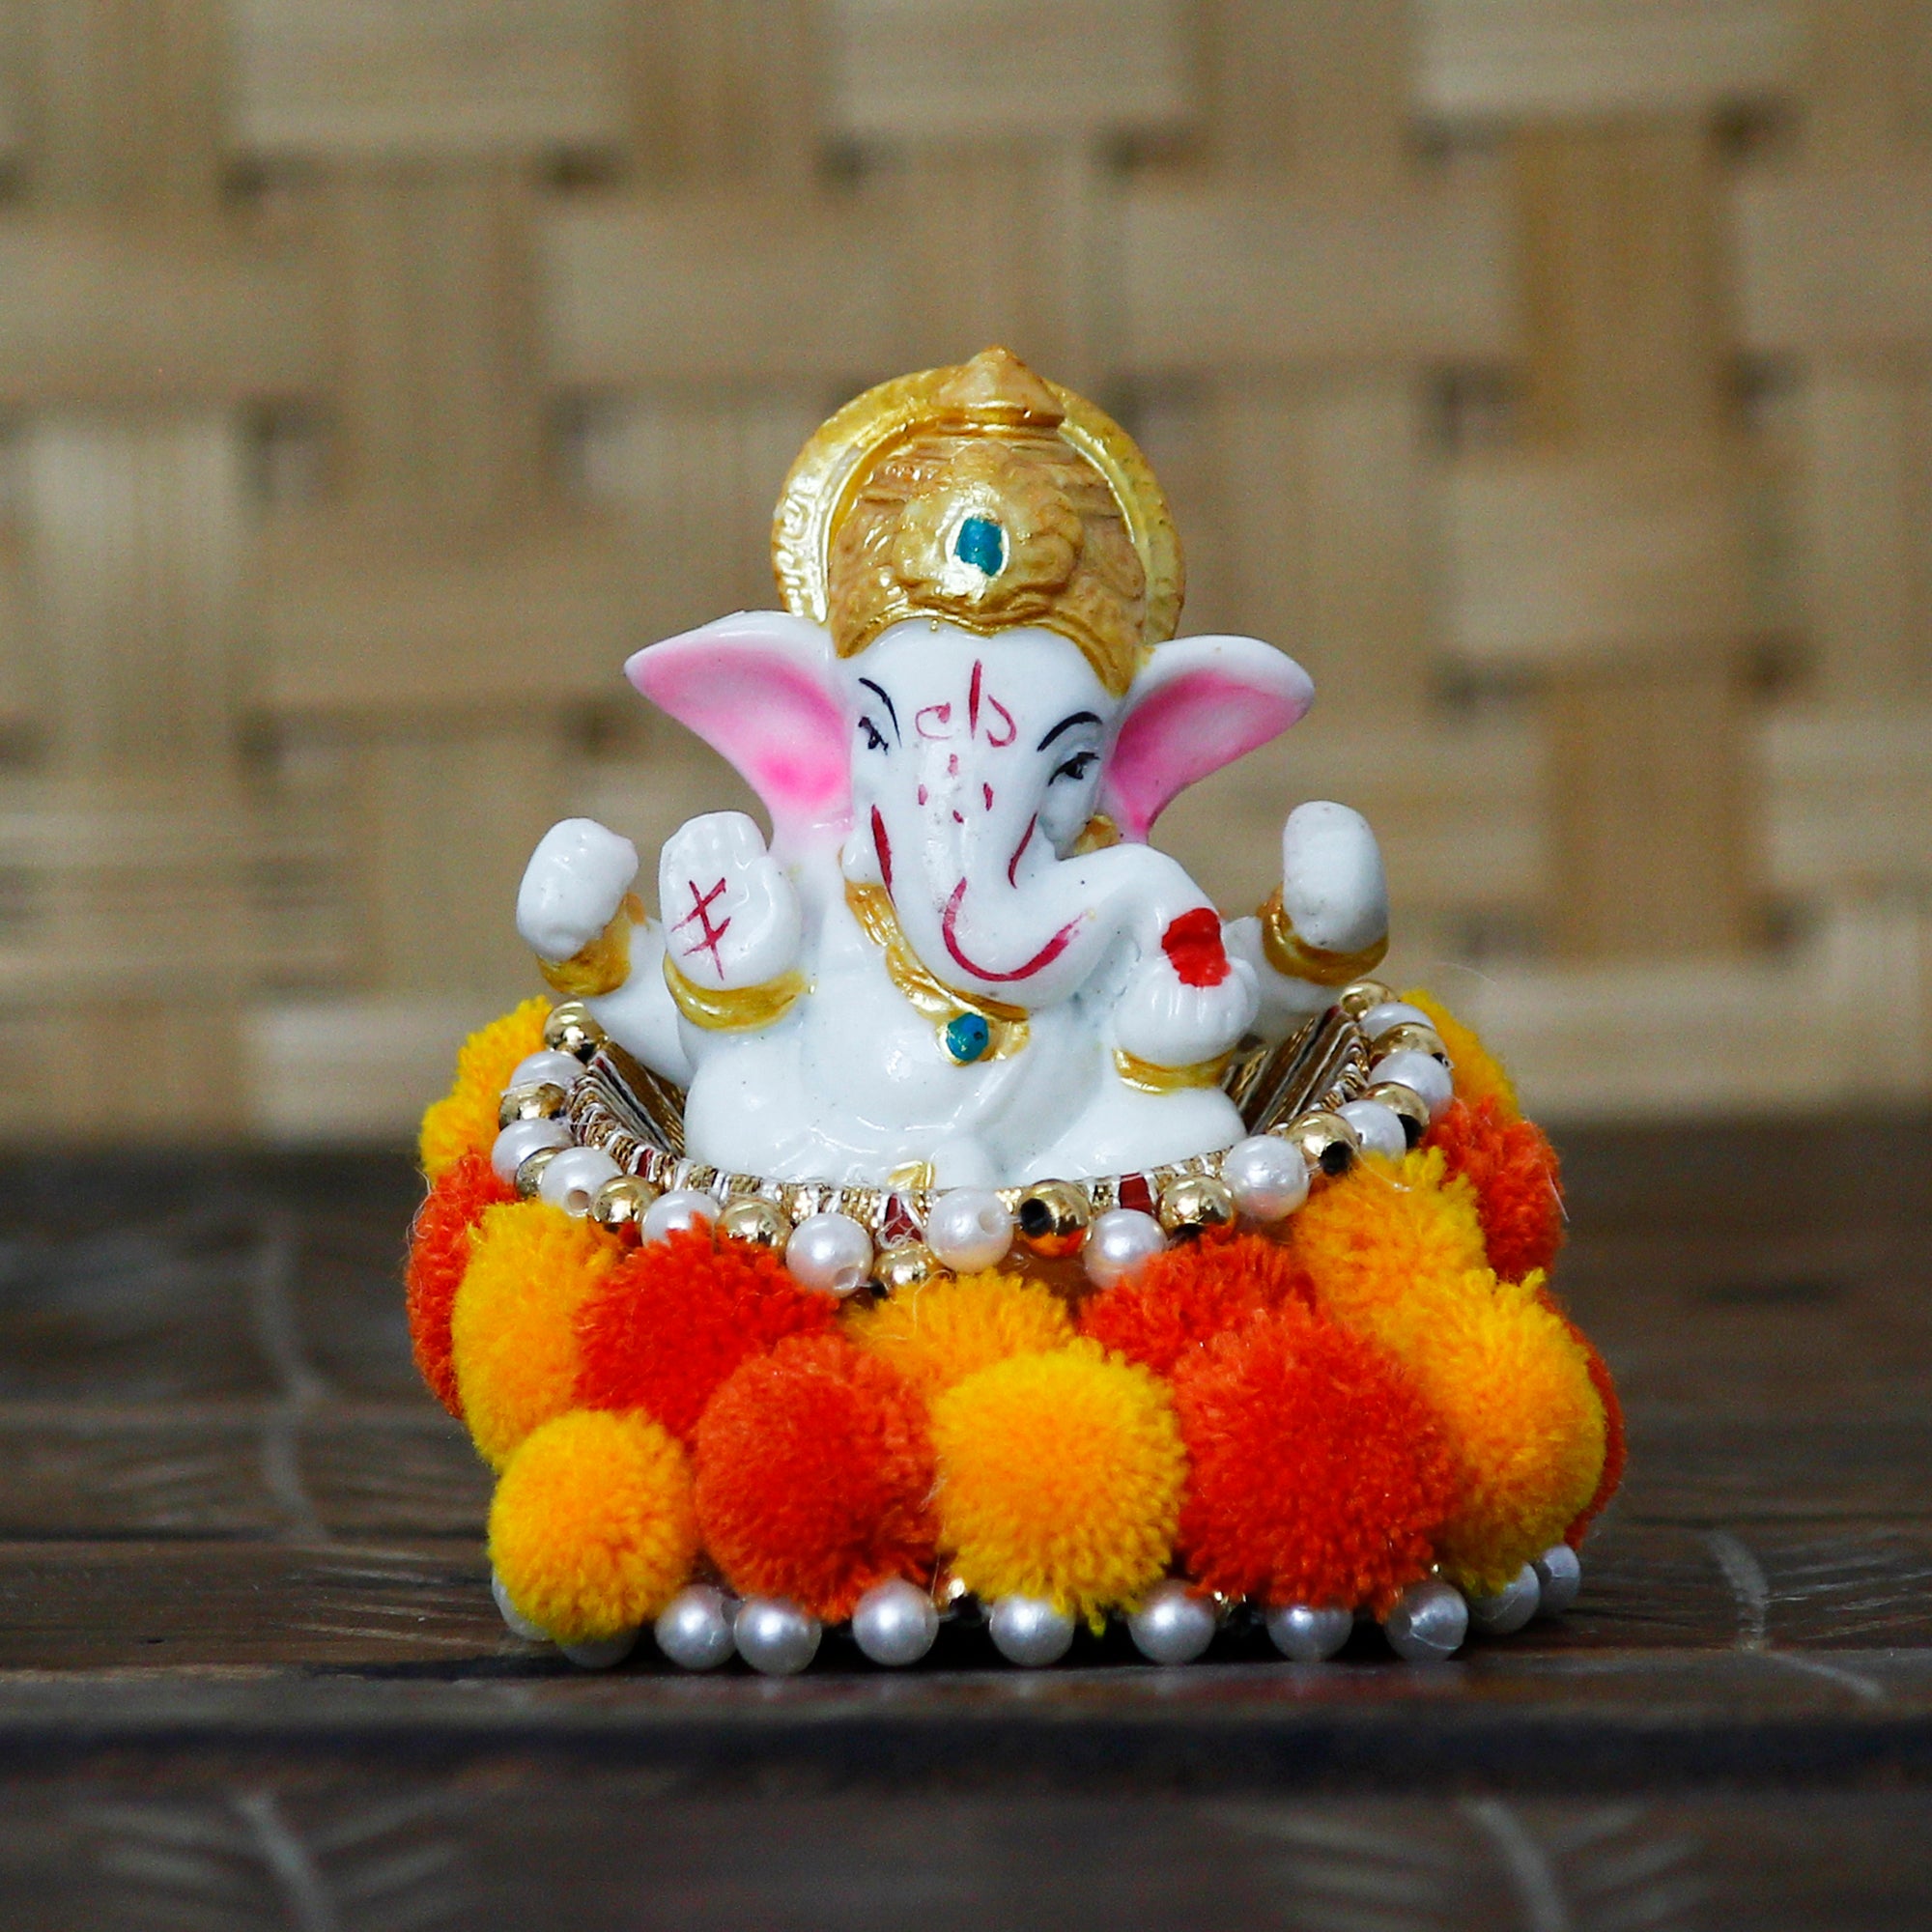 Polyresin Lord Ganesha Idol on Decorative Handcrafted Floral Plate for Home and Car Dashboard 1